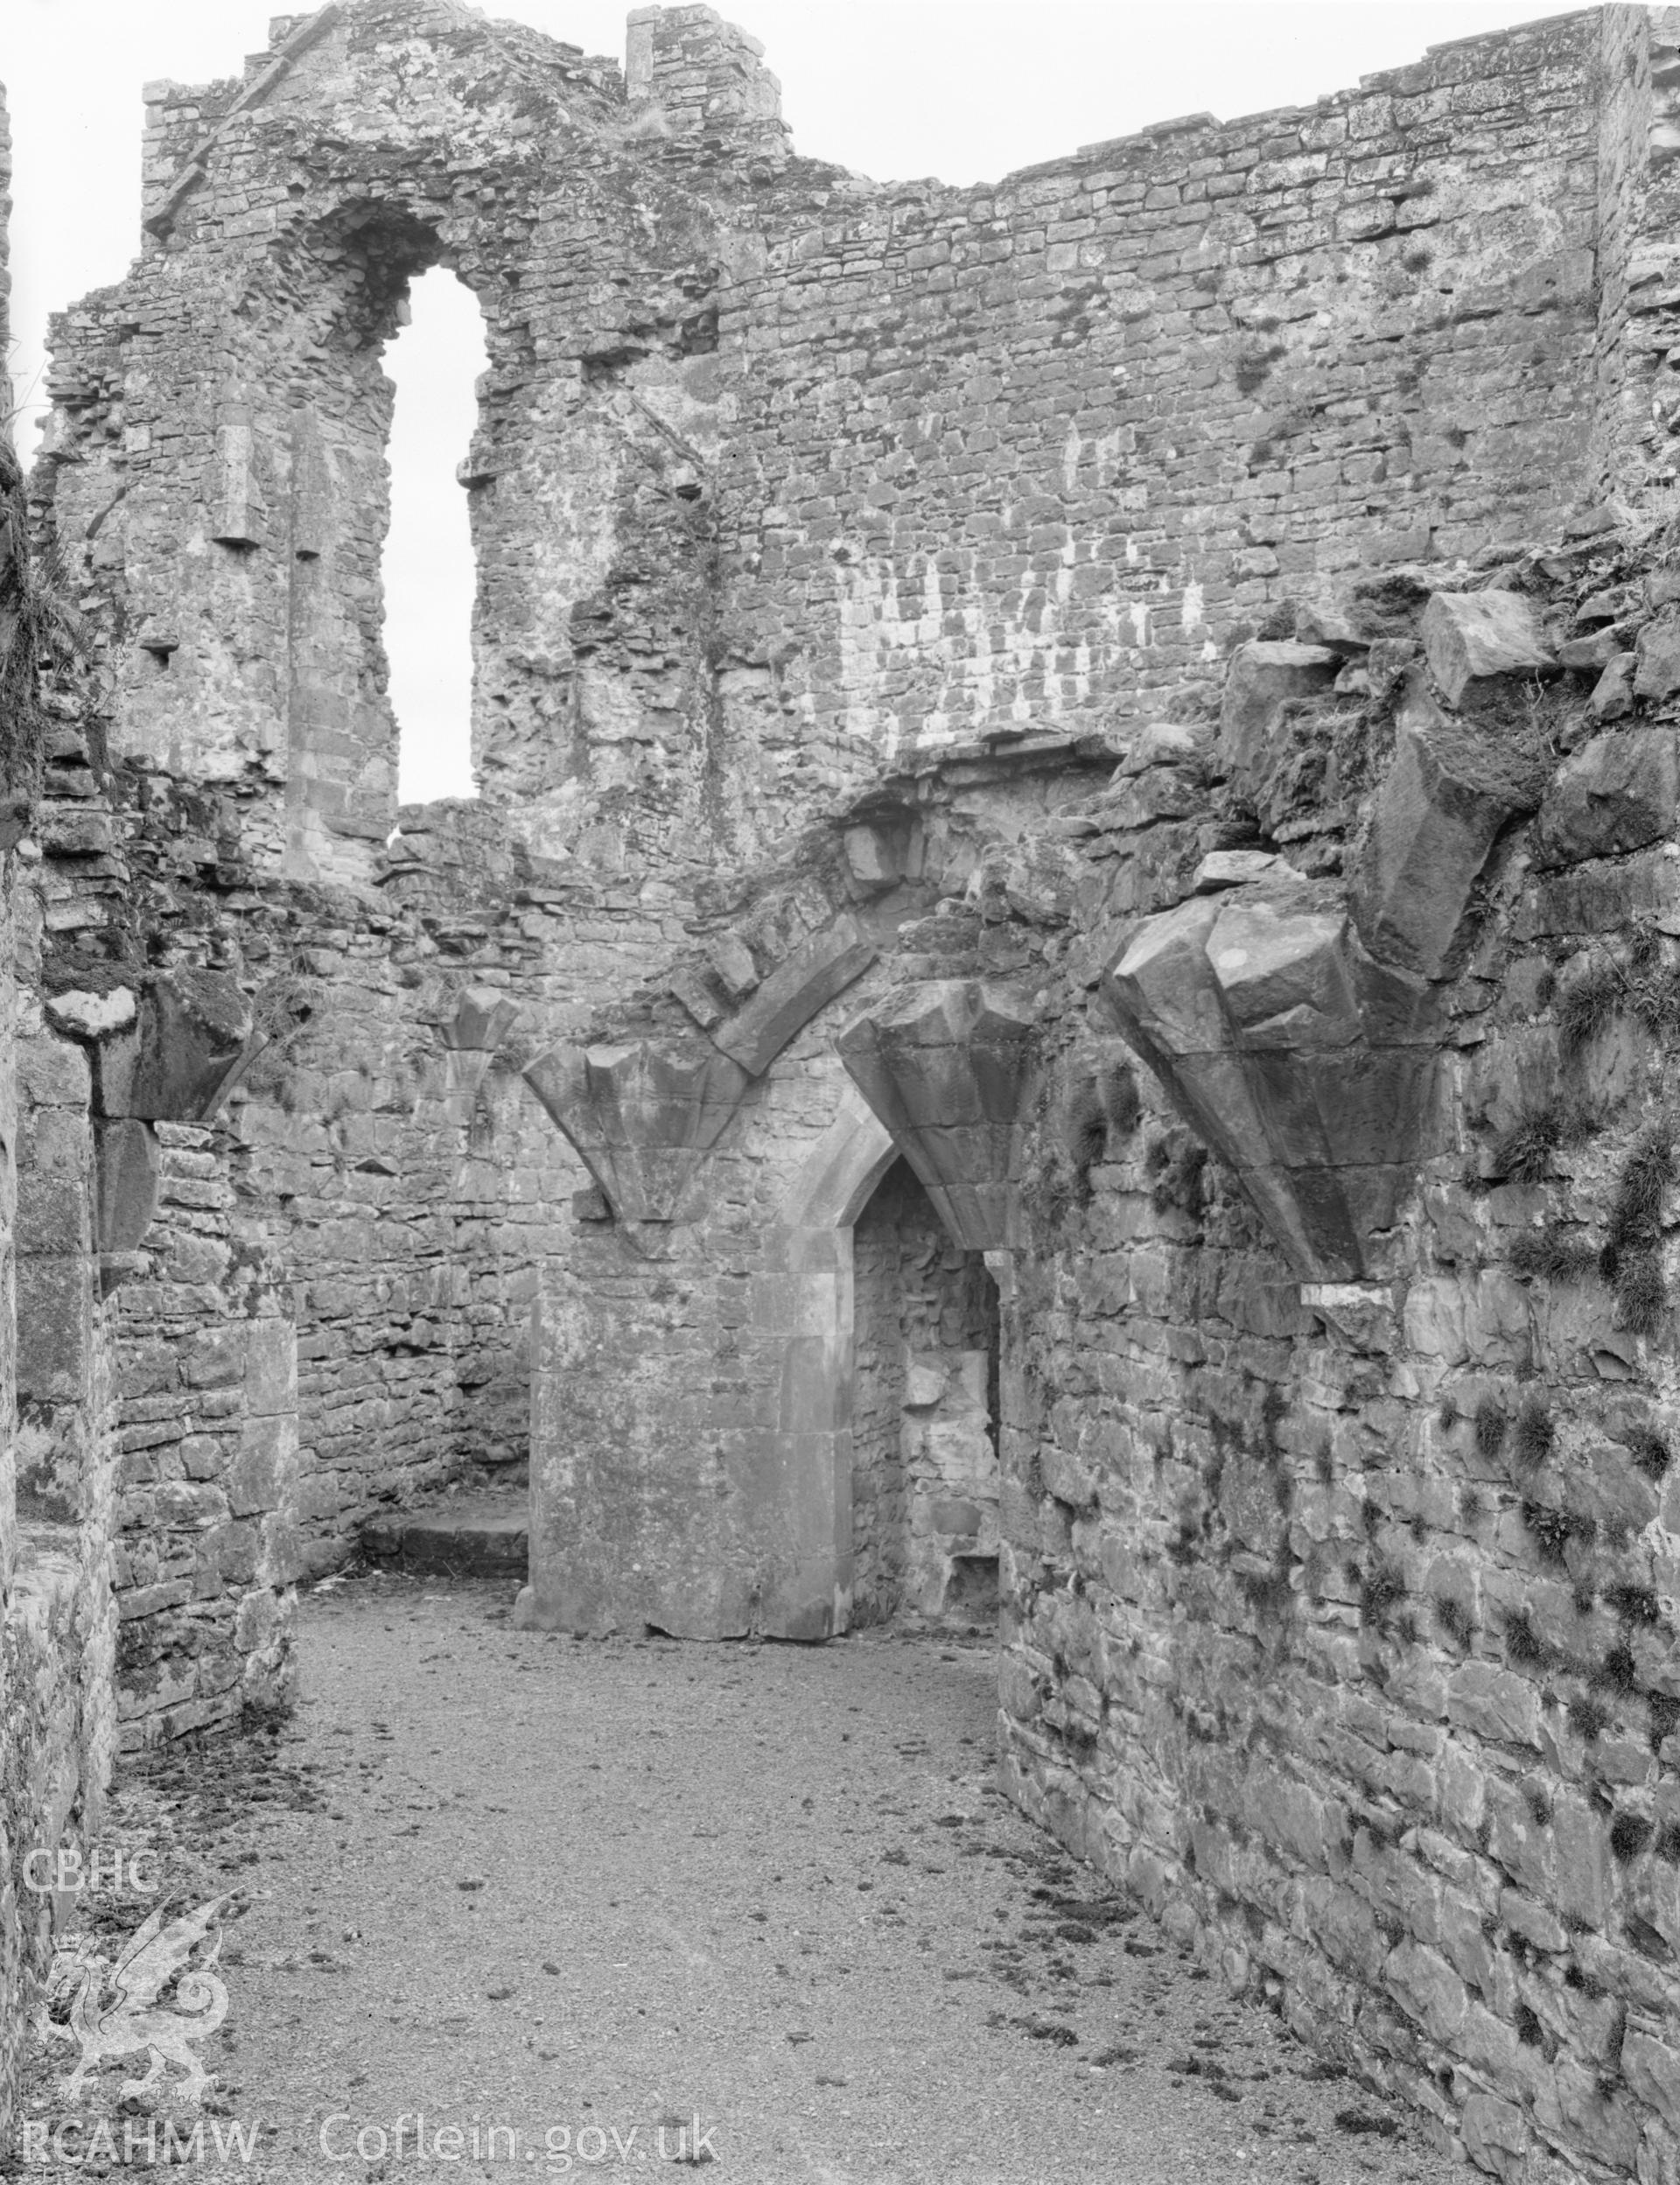 View of interior passage at Coity Castle, Coity Higher taken 09.04.65.